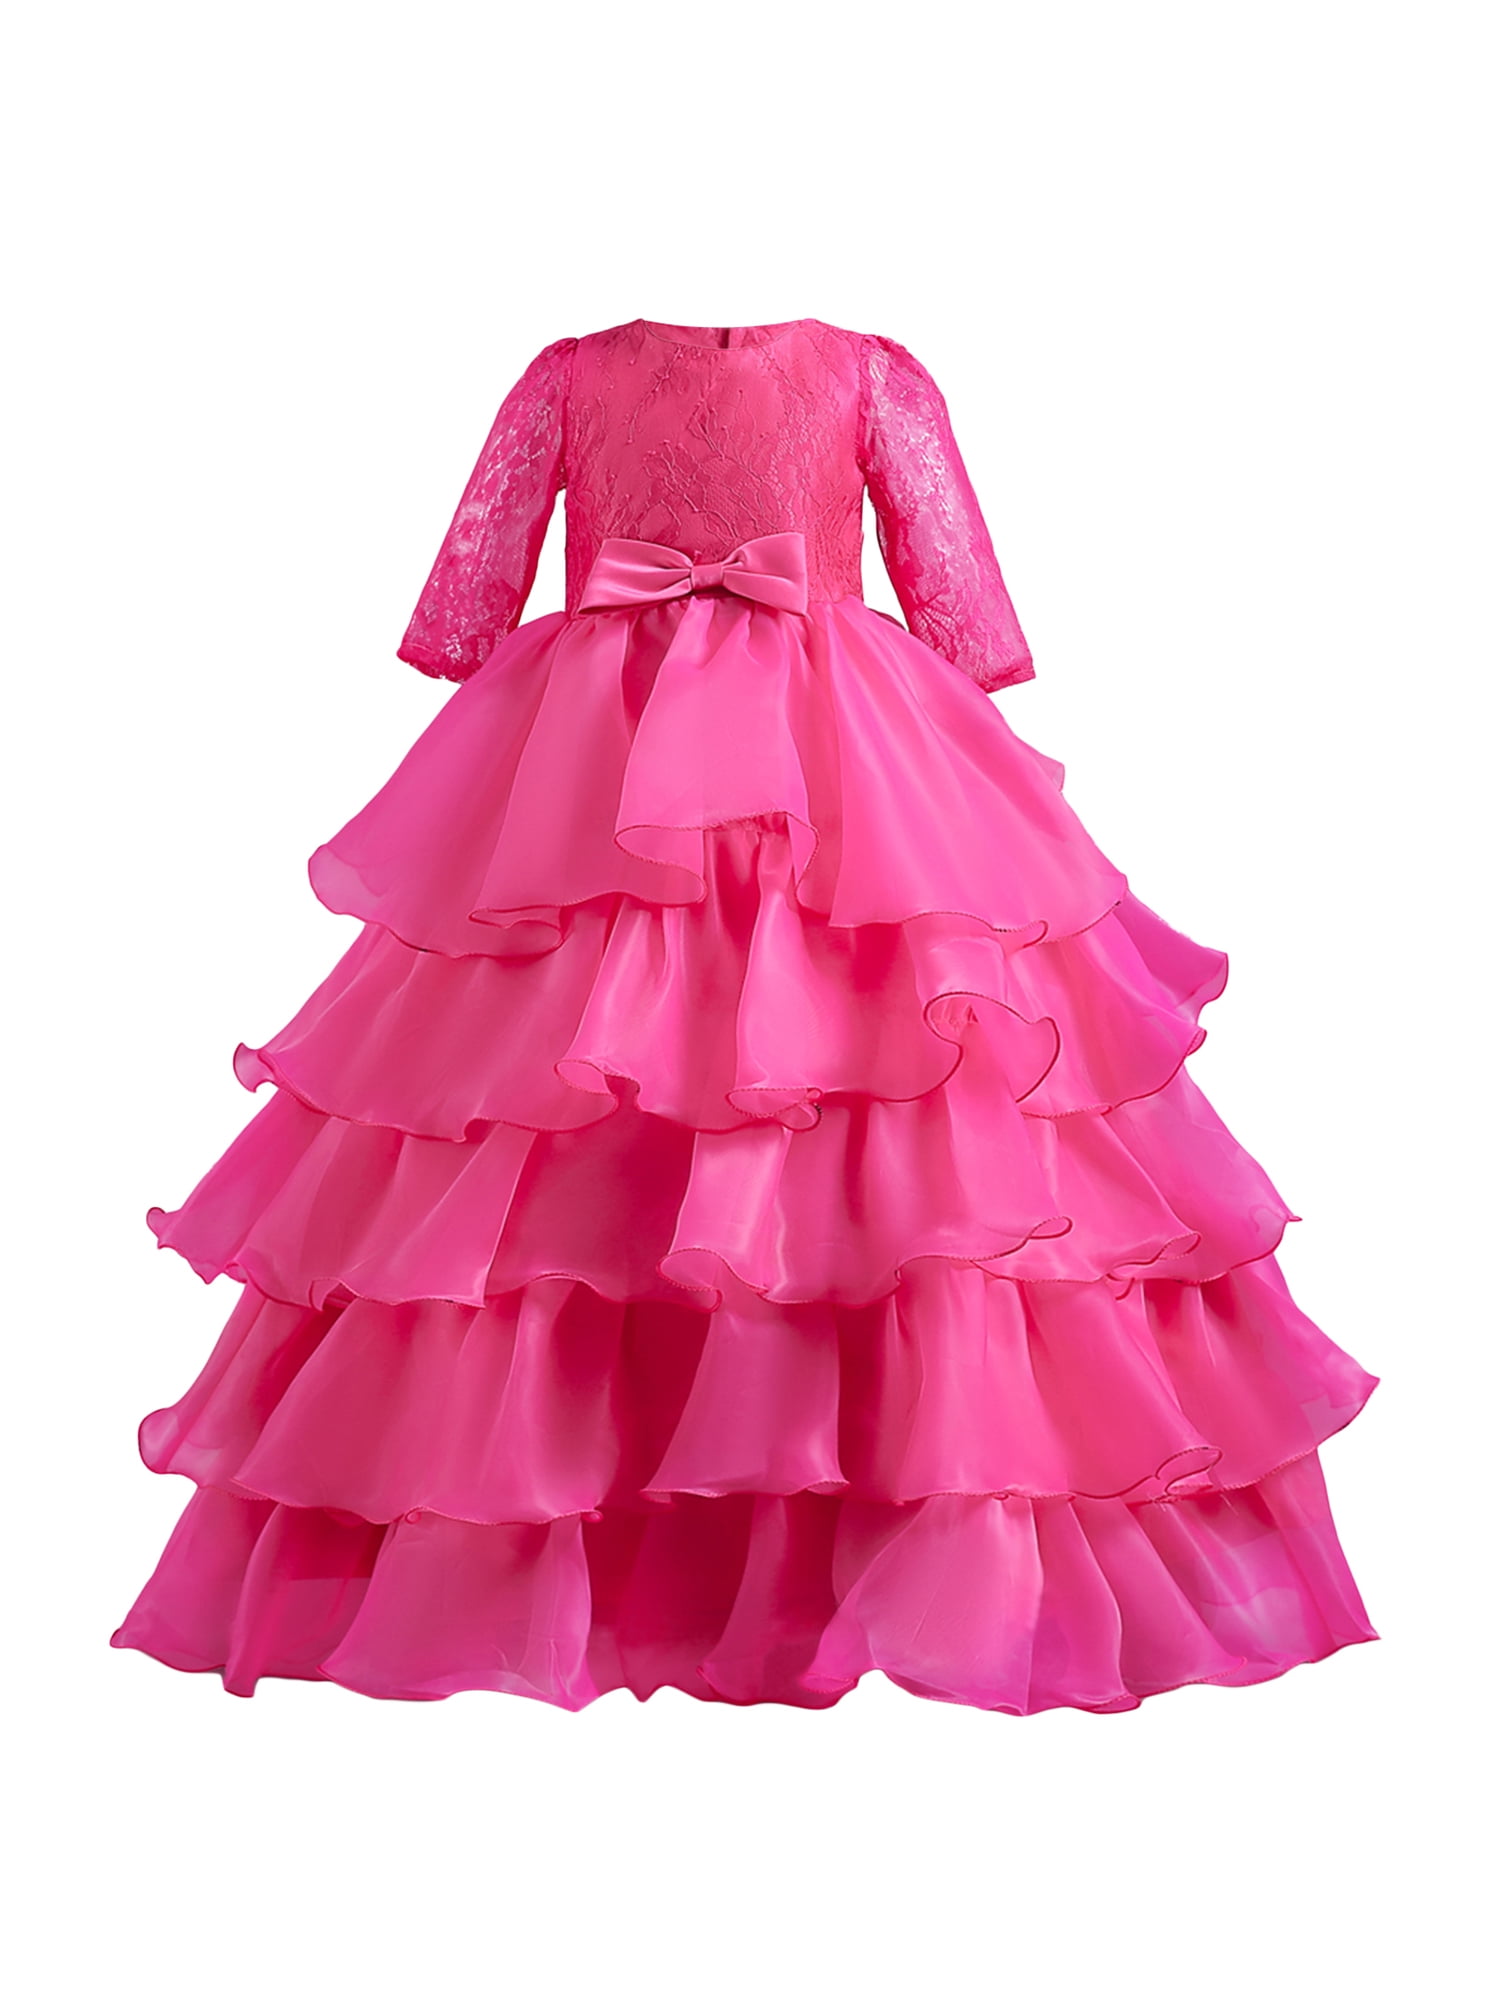 Custom Multi Layered Tulle Large Gown With Appliques For Prom, Formal  Events, And Parties Long Sleeves, Mother And Daughter Maxi Dress From  Xushenlina1, $66.17 | DHgate.Com